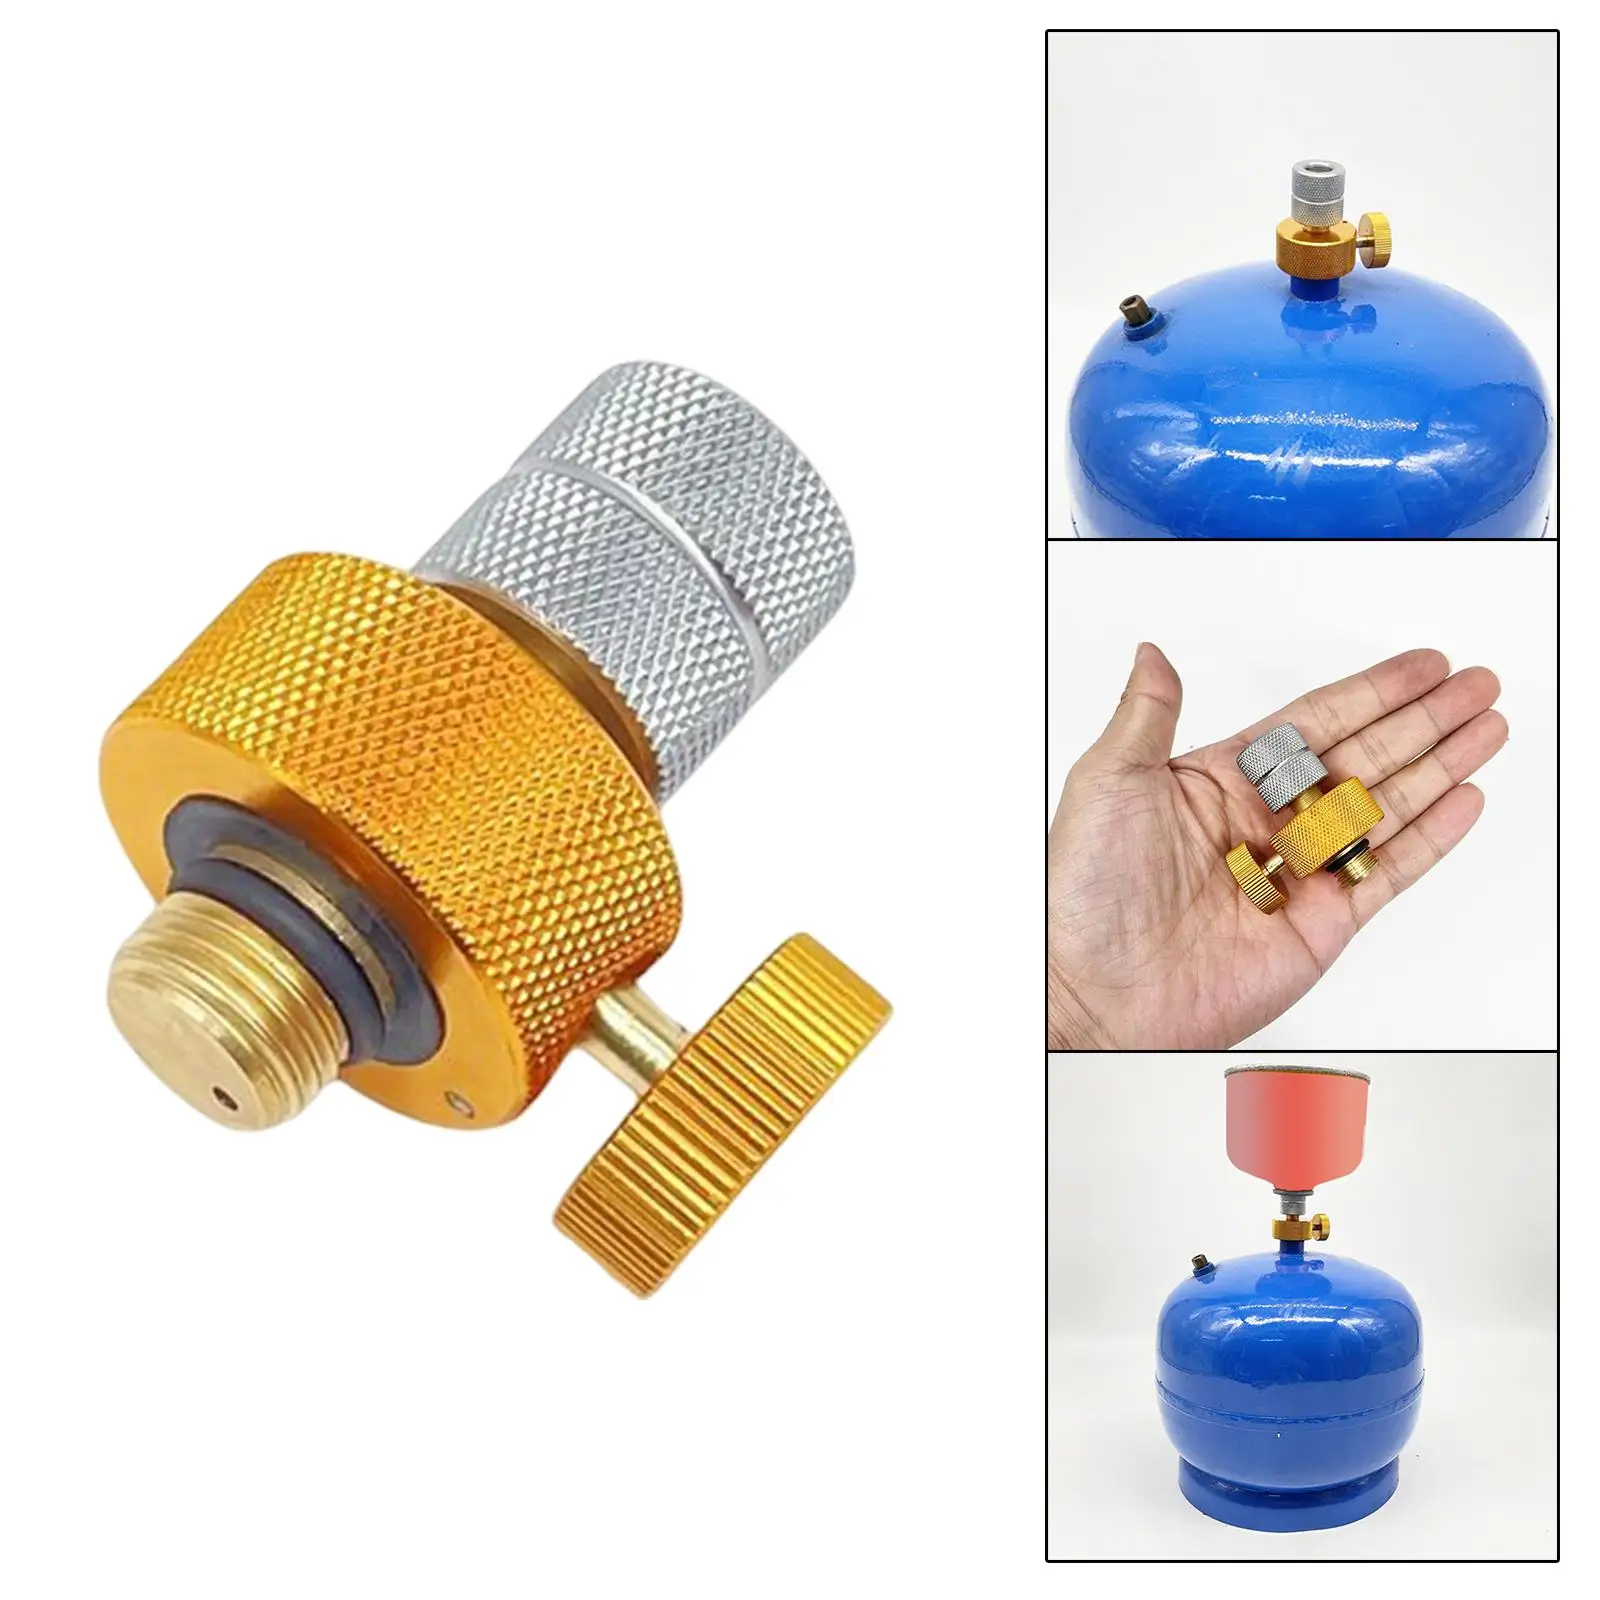 Portable Gas Tank Adapter, Furnace Connector, Gas Filling Convert, Cylinder for Camping Fuel Tank Gas Canister Cooking